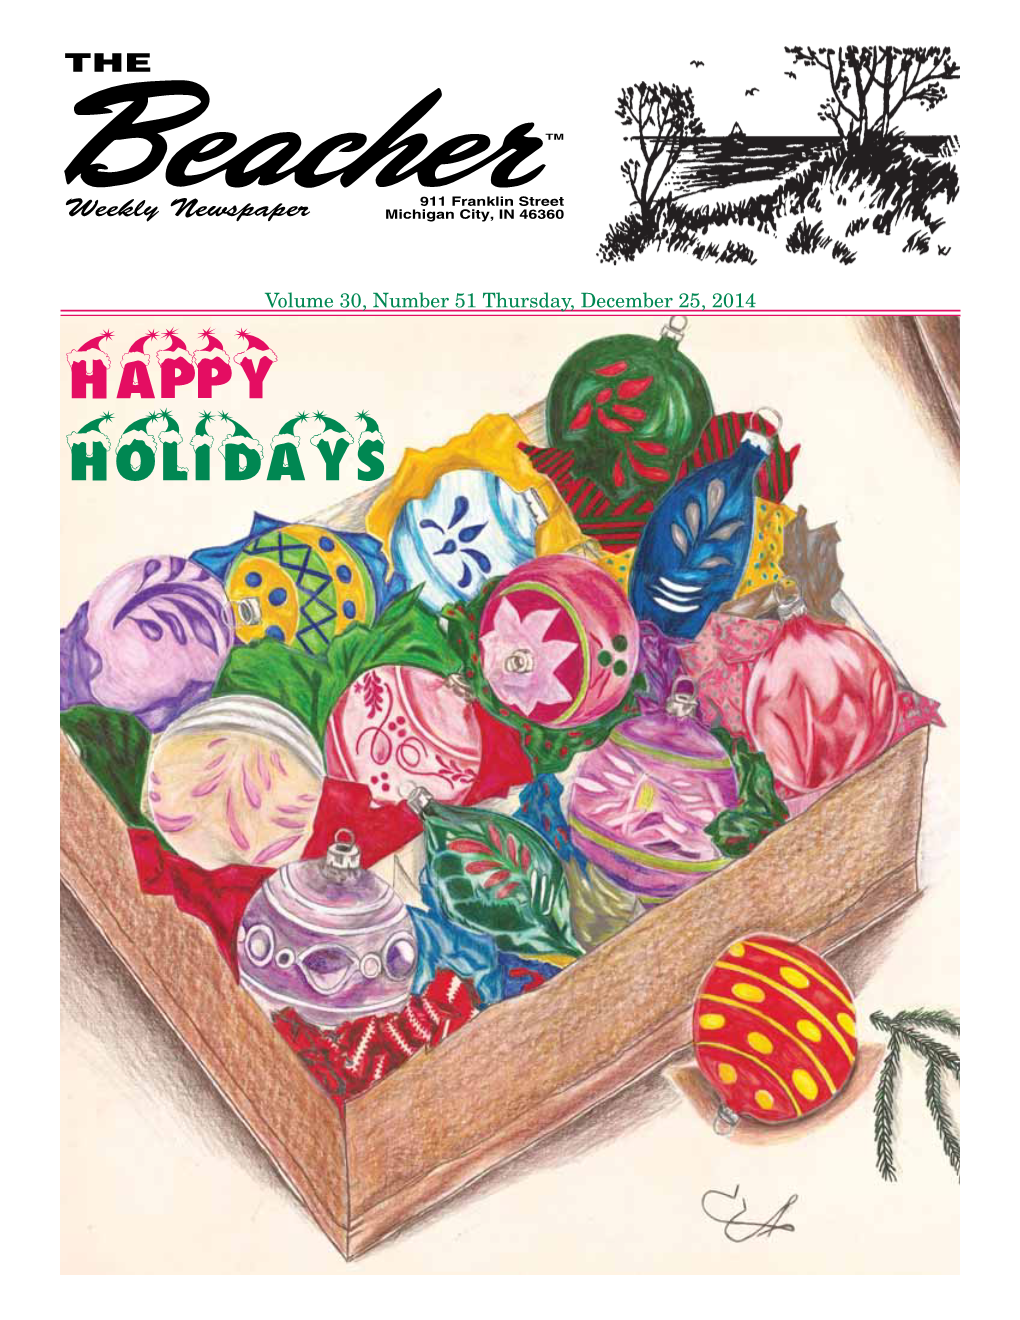 Happy Holidays the Page 2 December 25, 2014